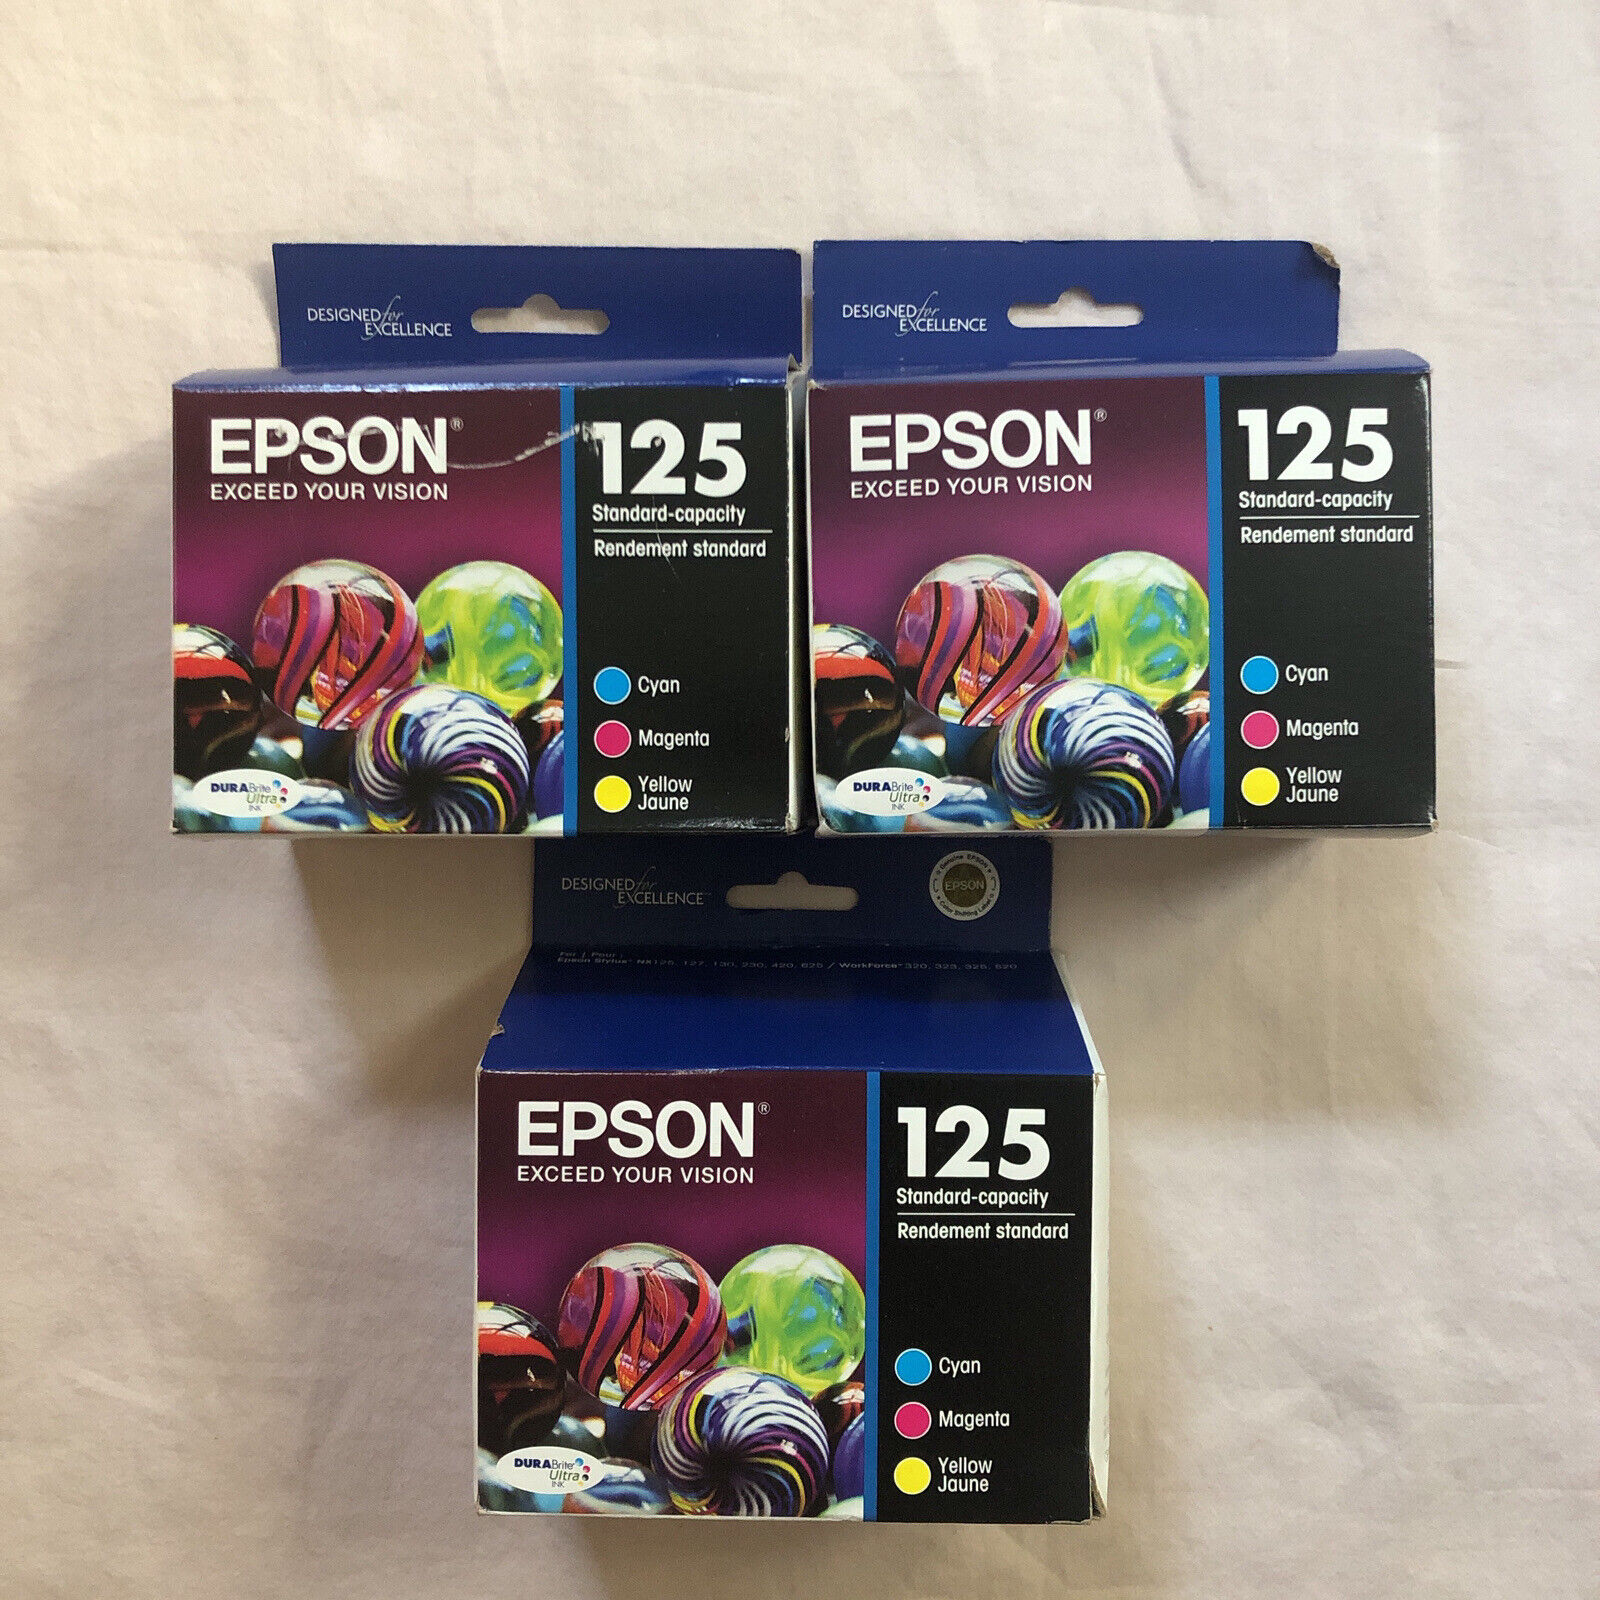 Epson 125 Genuine Tri-Color Cyan Magenta Yellow Ink Cartridges T125520 Lot of 3